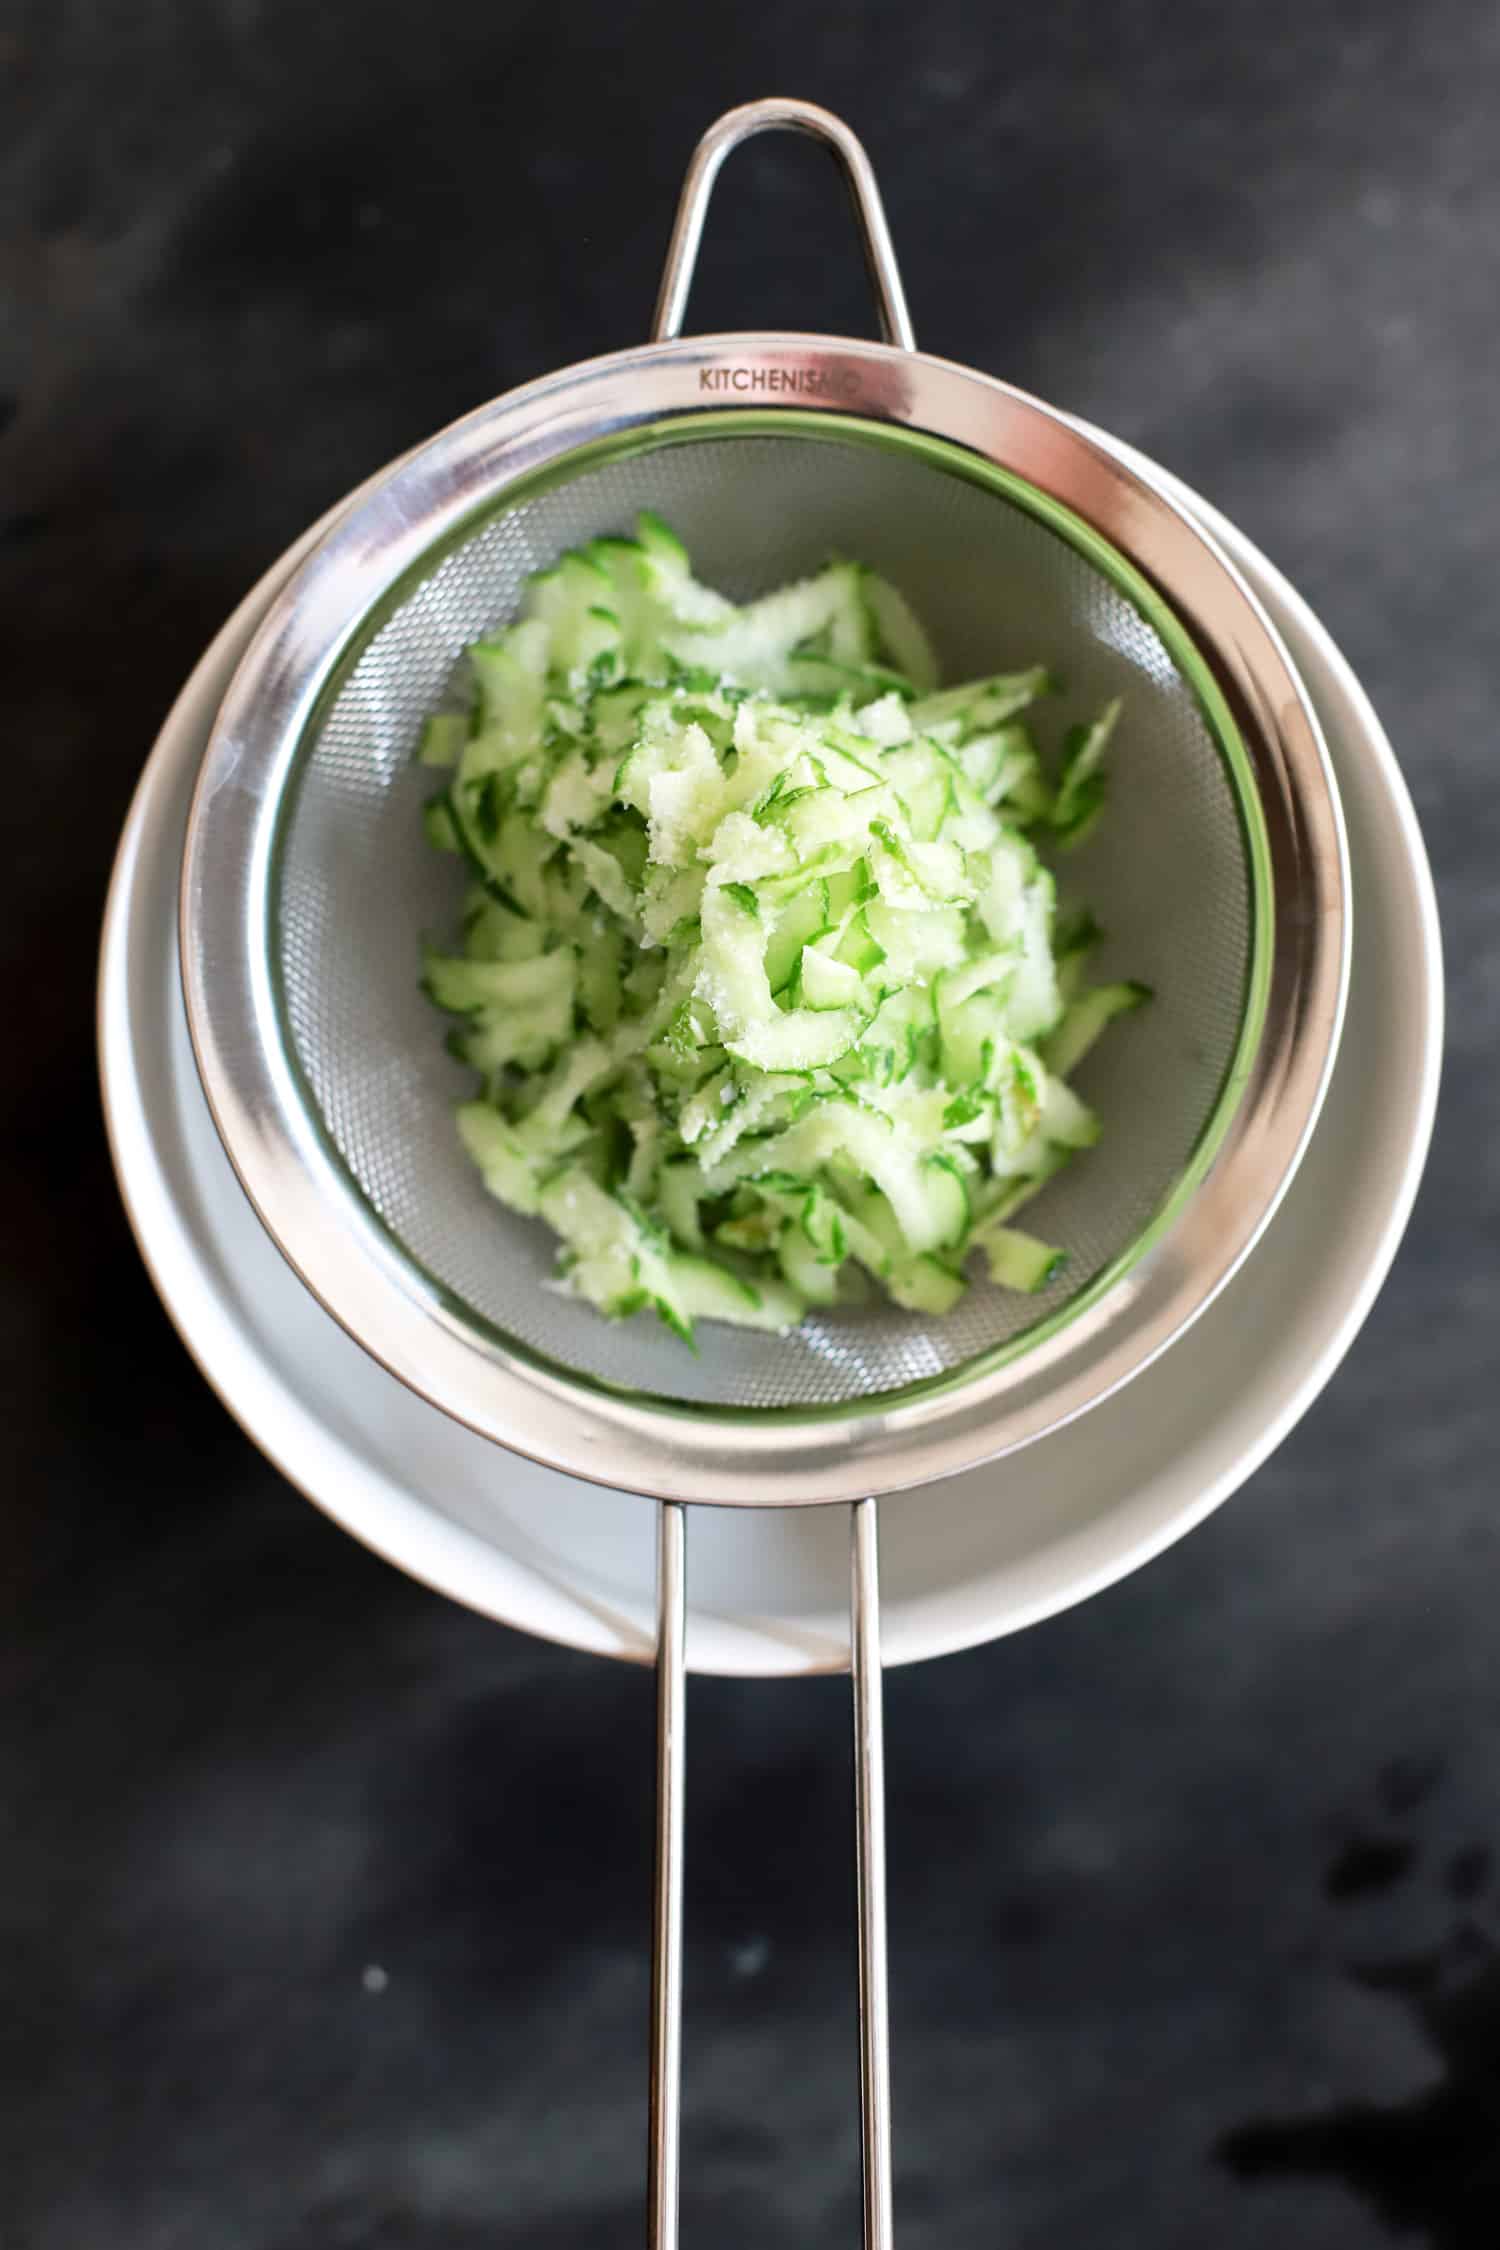 grated cucumber in fine mesh strainer over white bowl on black background